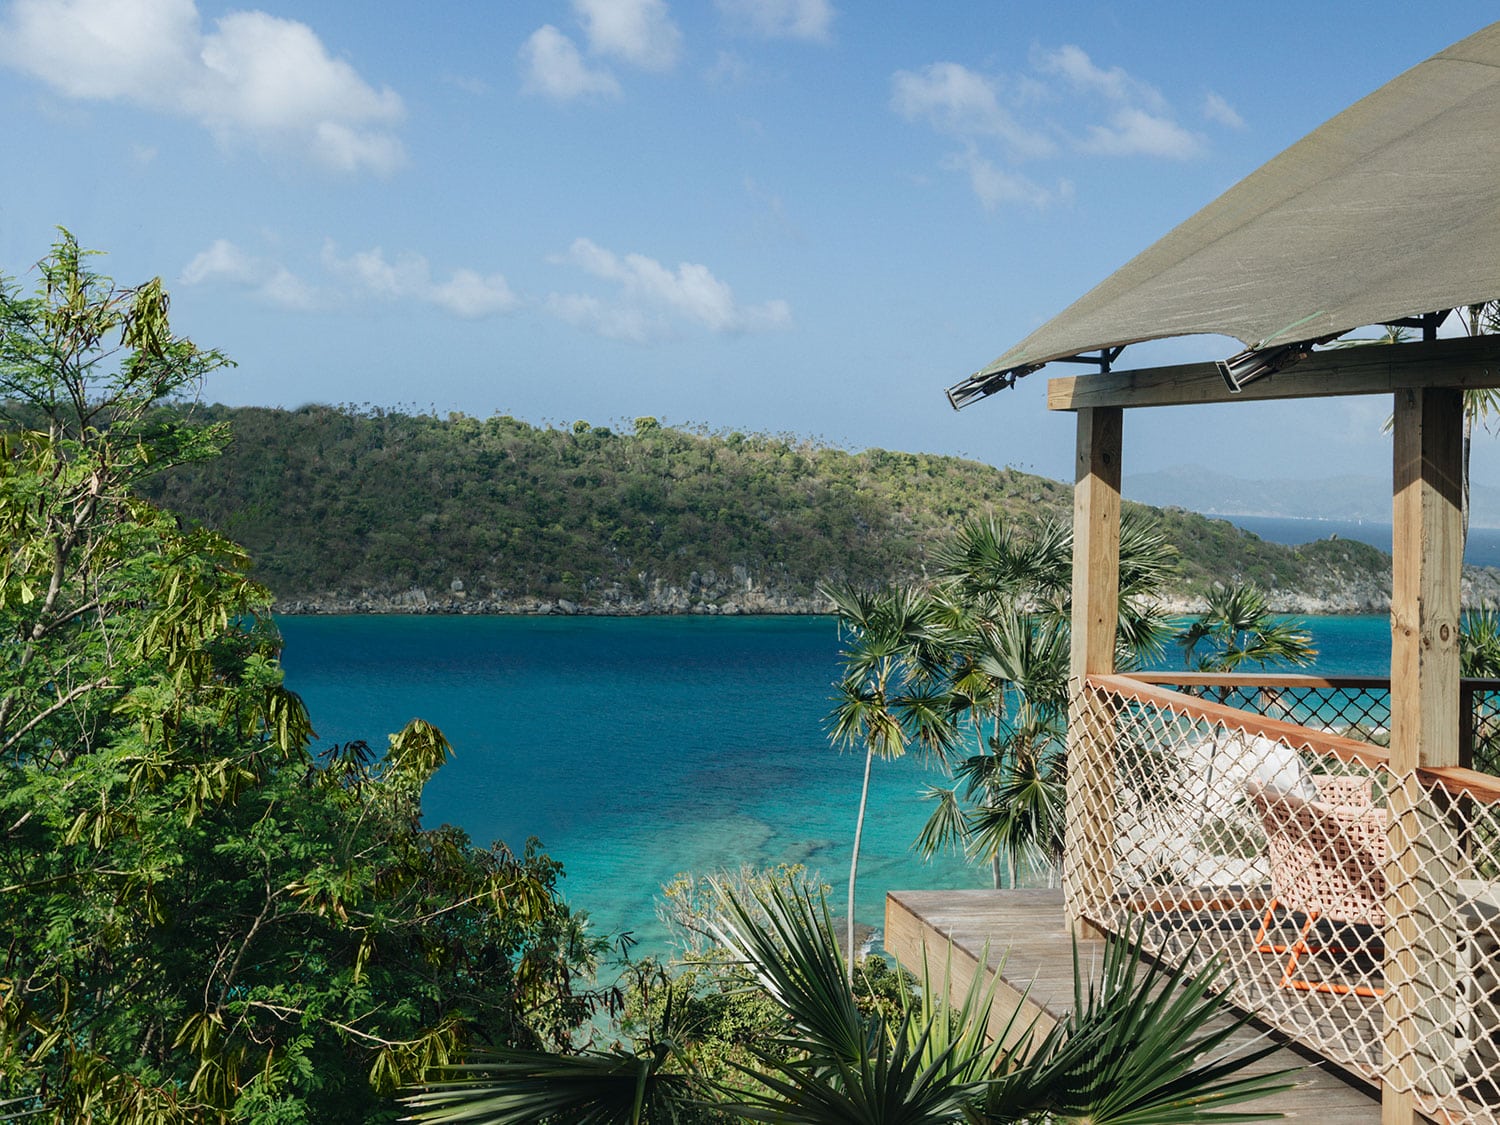 The view from a private glamping tent at Lovango Resort and Beach Club in St. John, U.S. Virgin Islands.